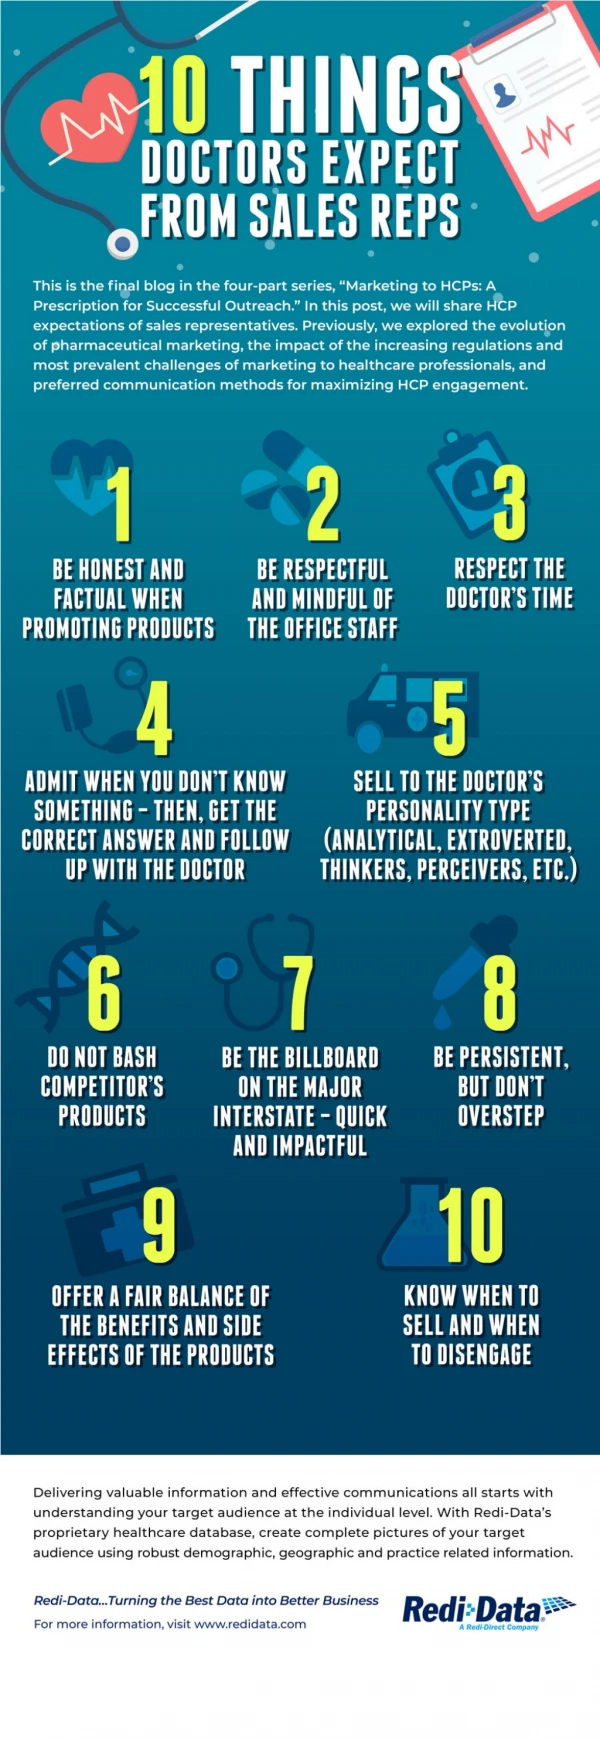 10 Things Doctors Expect from Sales Reps